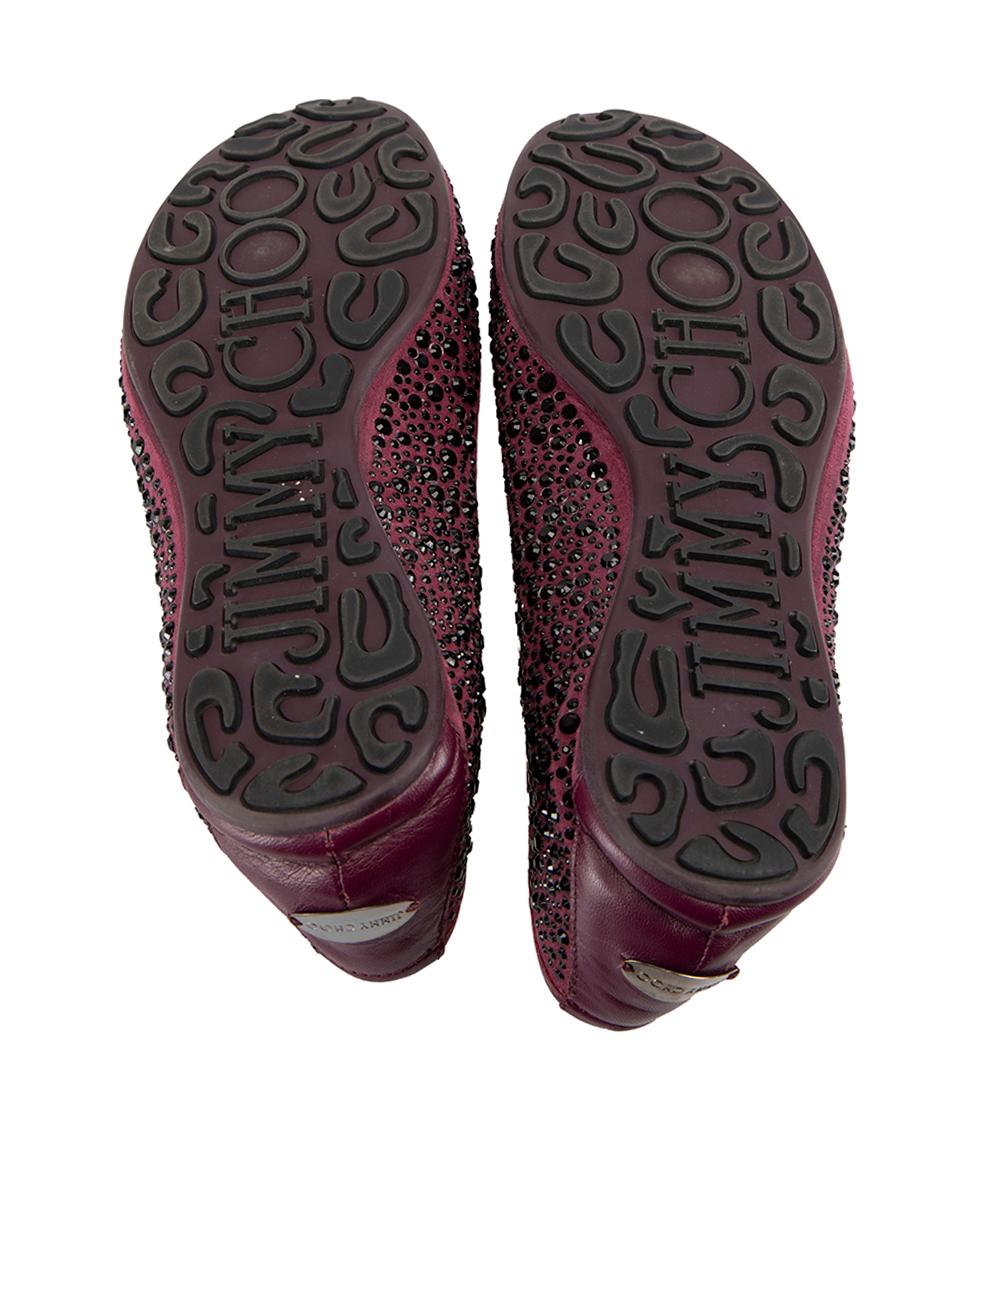 Burgundy Embellished Ballet Flats Size EU 37 In Good Condition For Sale In London, GB